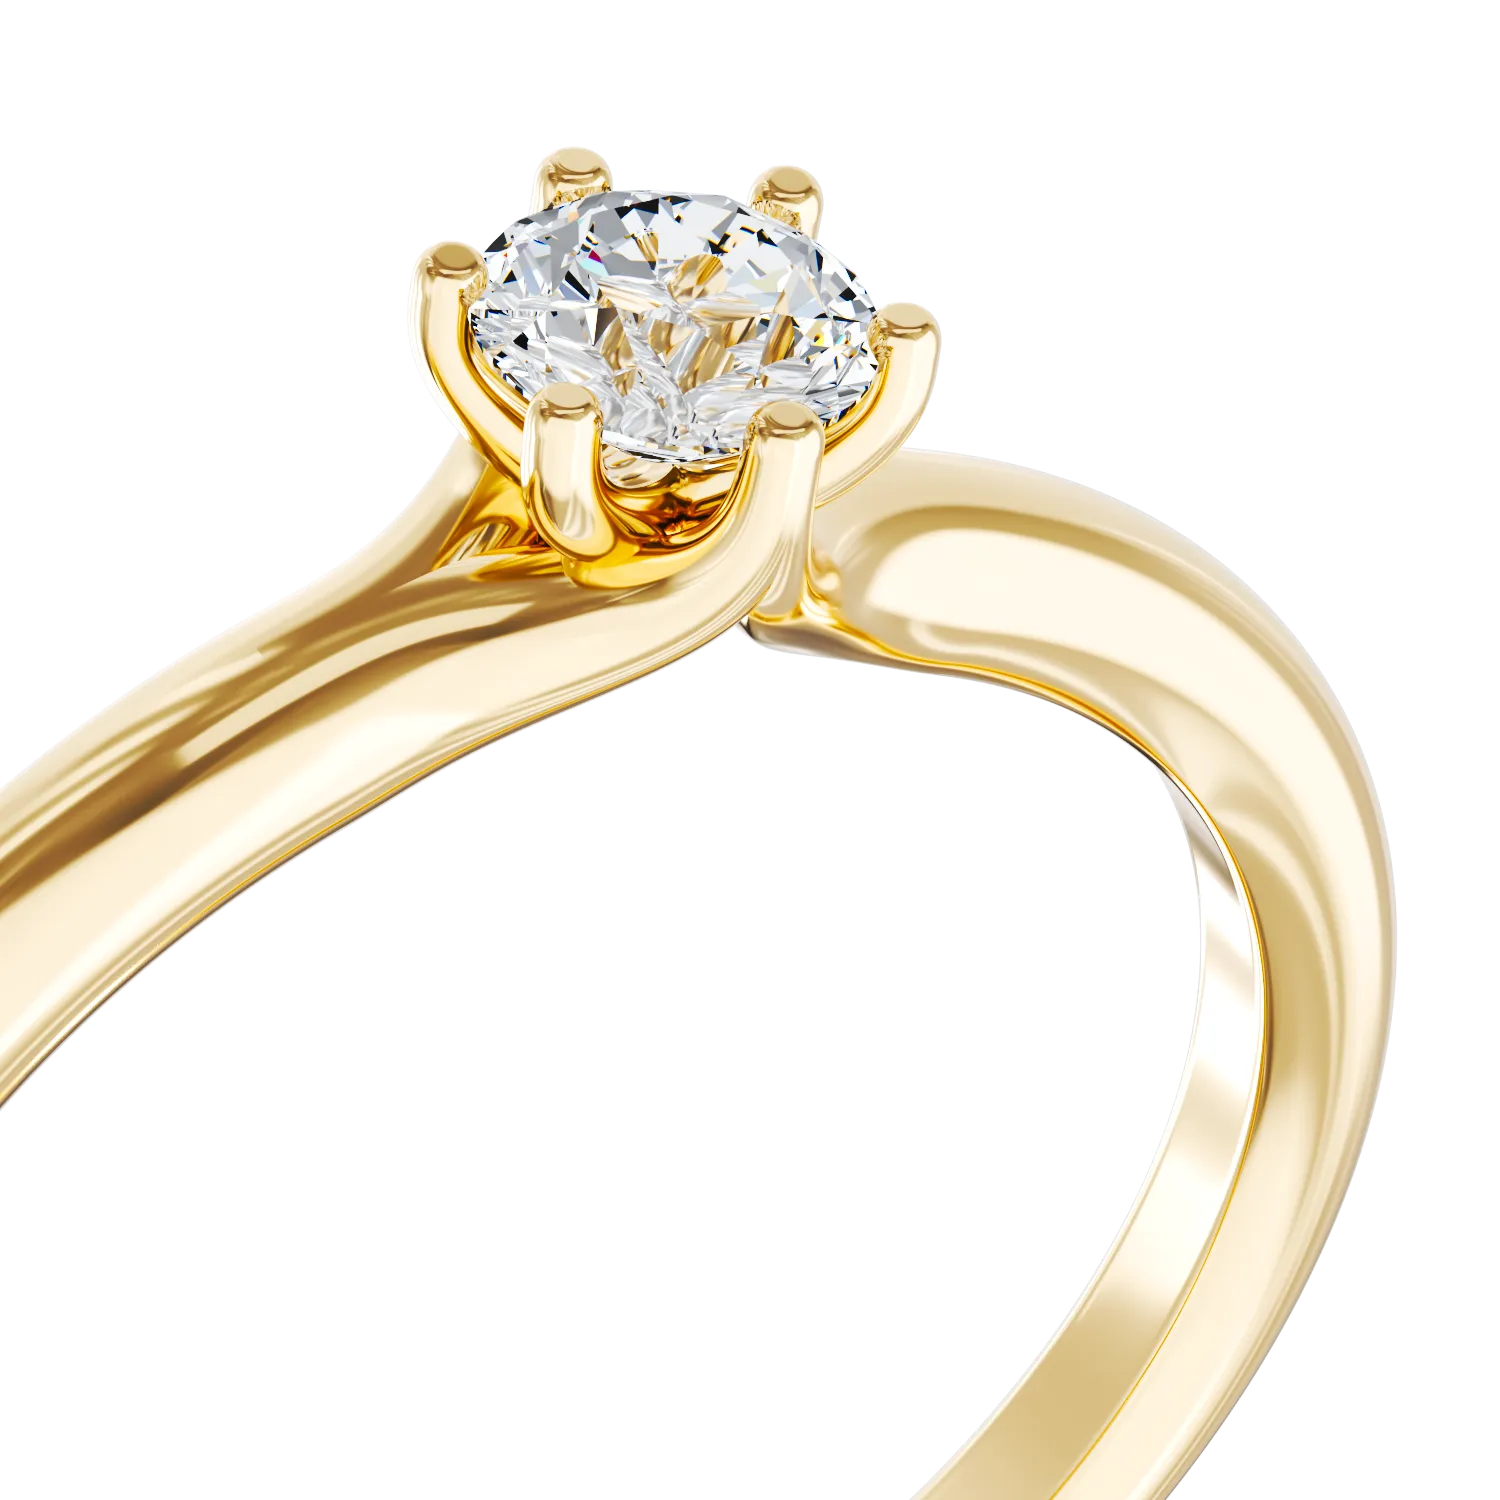 Yellow gold engagement ring with 0.15ct solitaire diamond